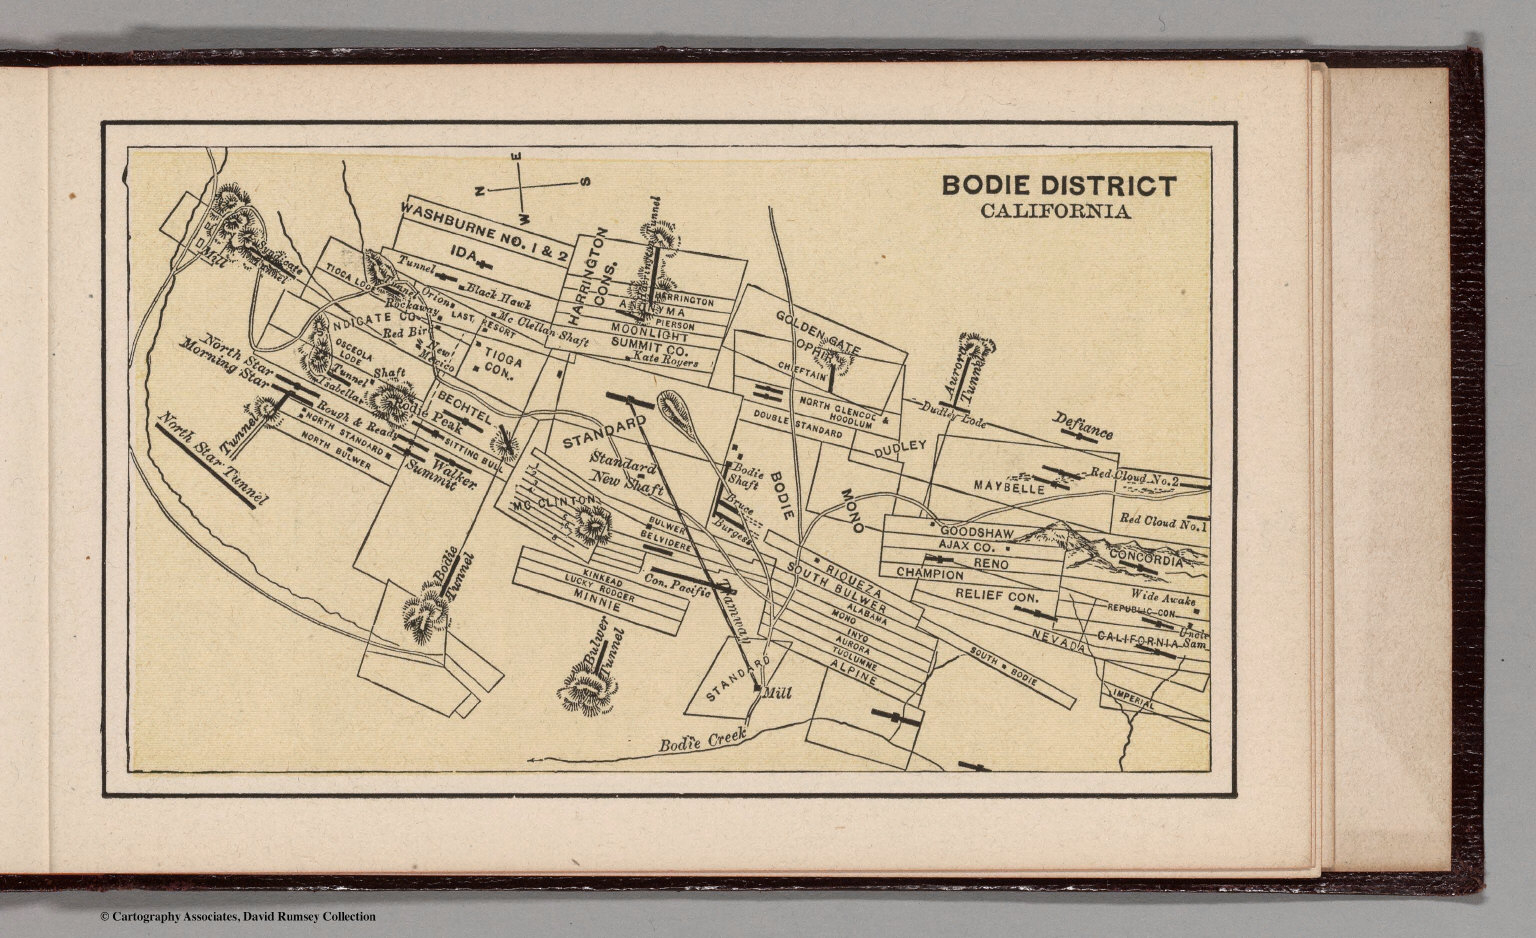 Bodie District, California - David Rumsey Historical Map Collection - Bodie California Map